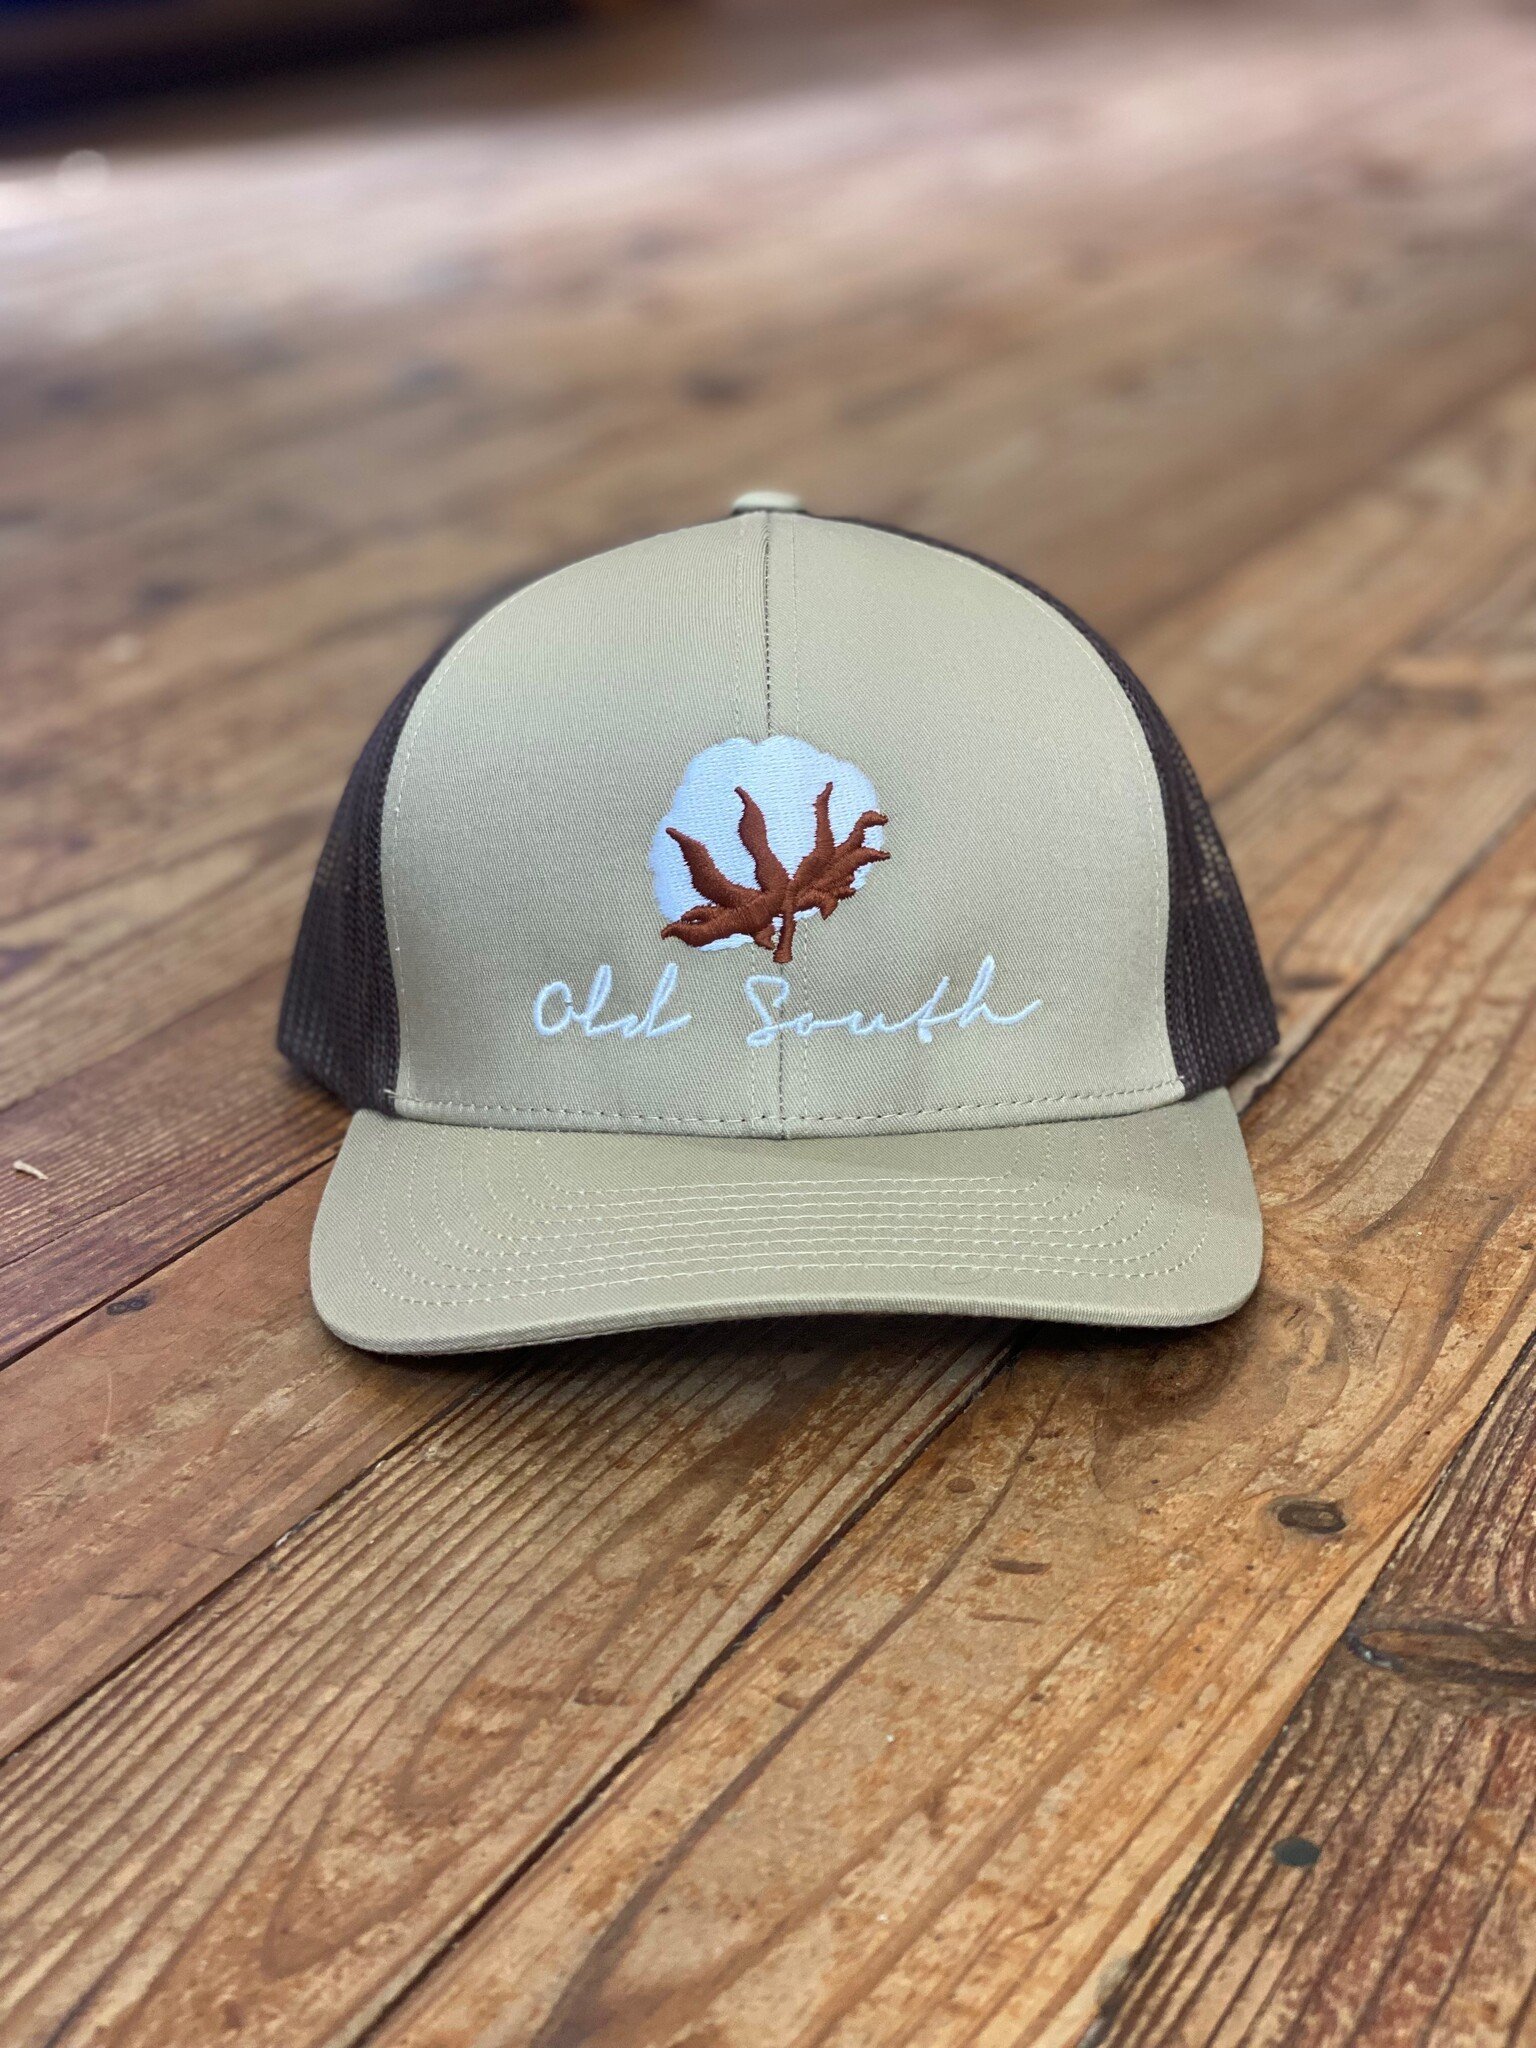 Old South Pheasant Trucker Hat Graphite - Papa's General Store